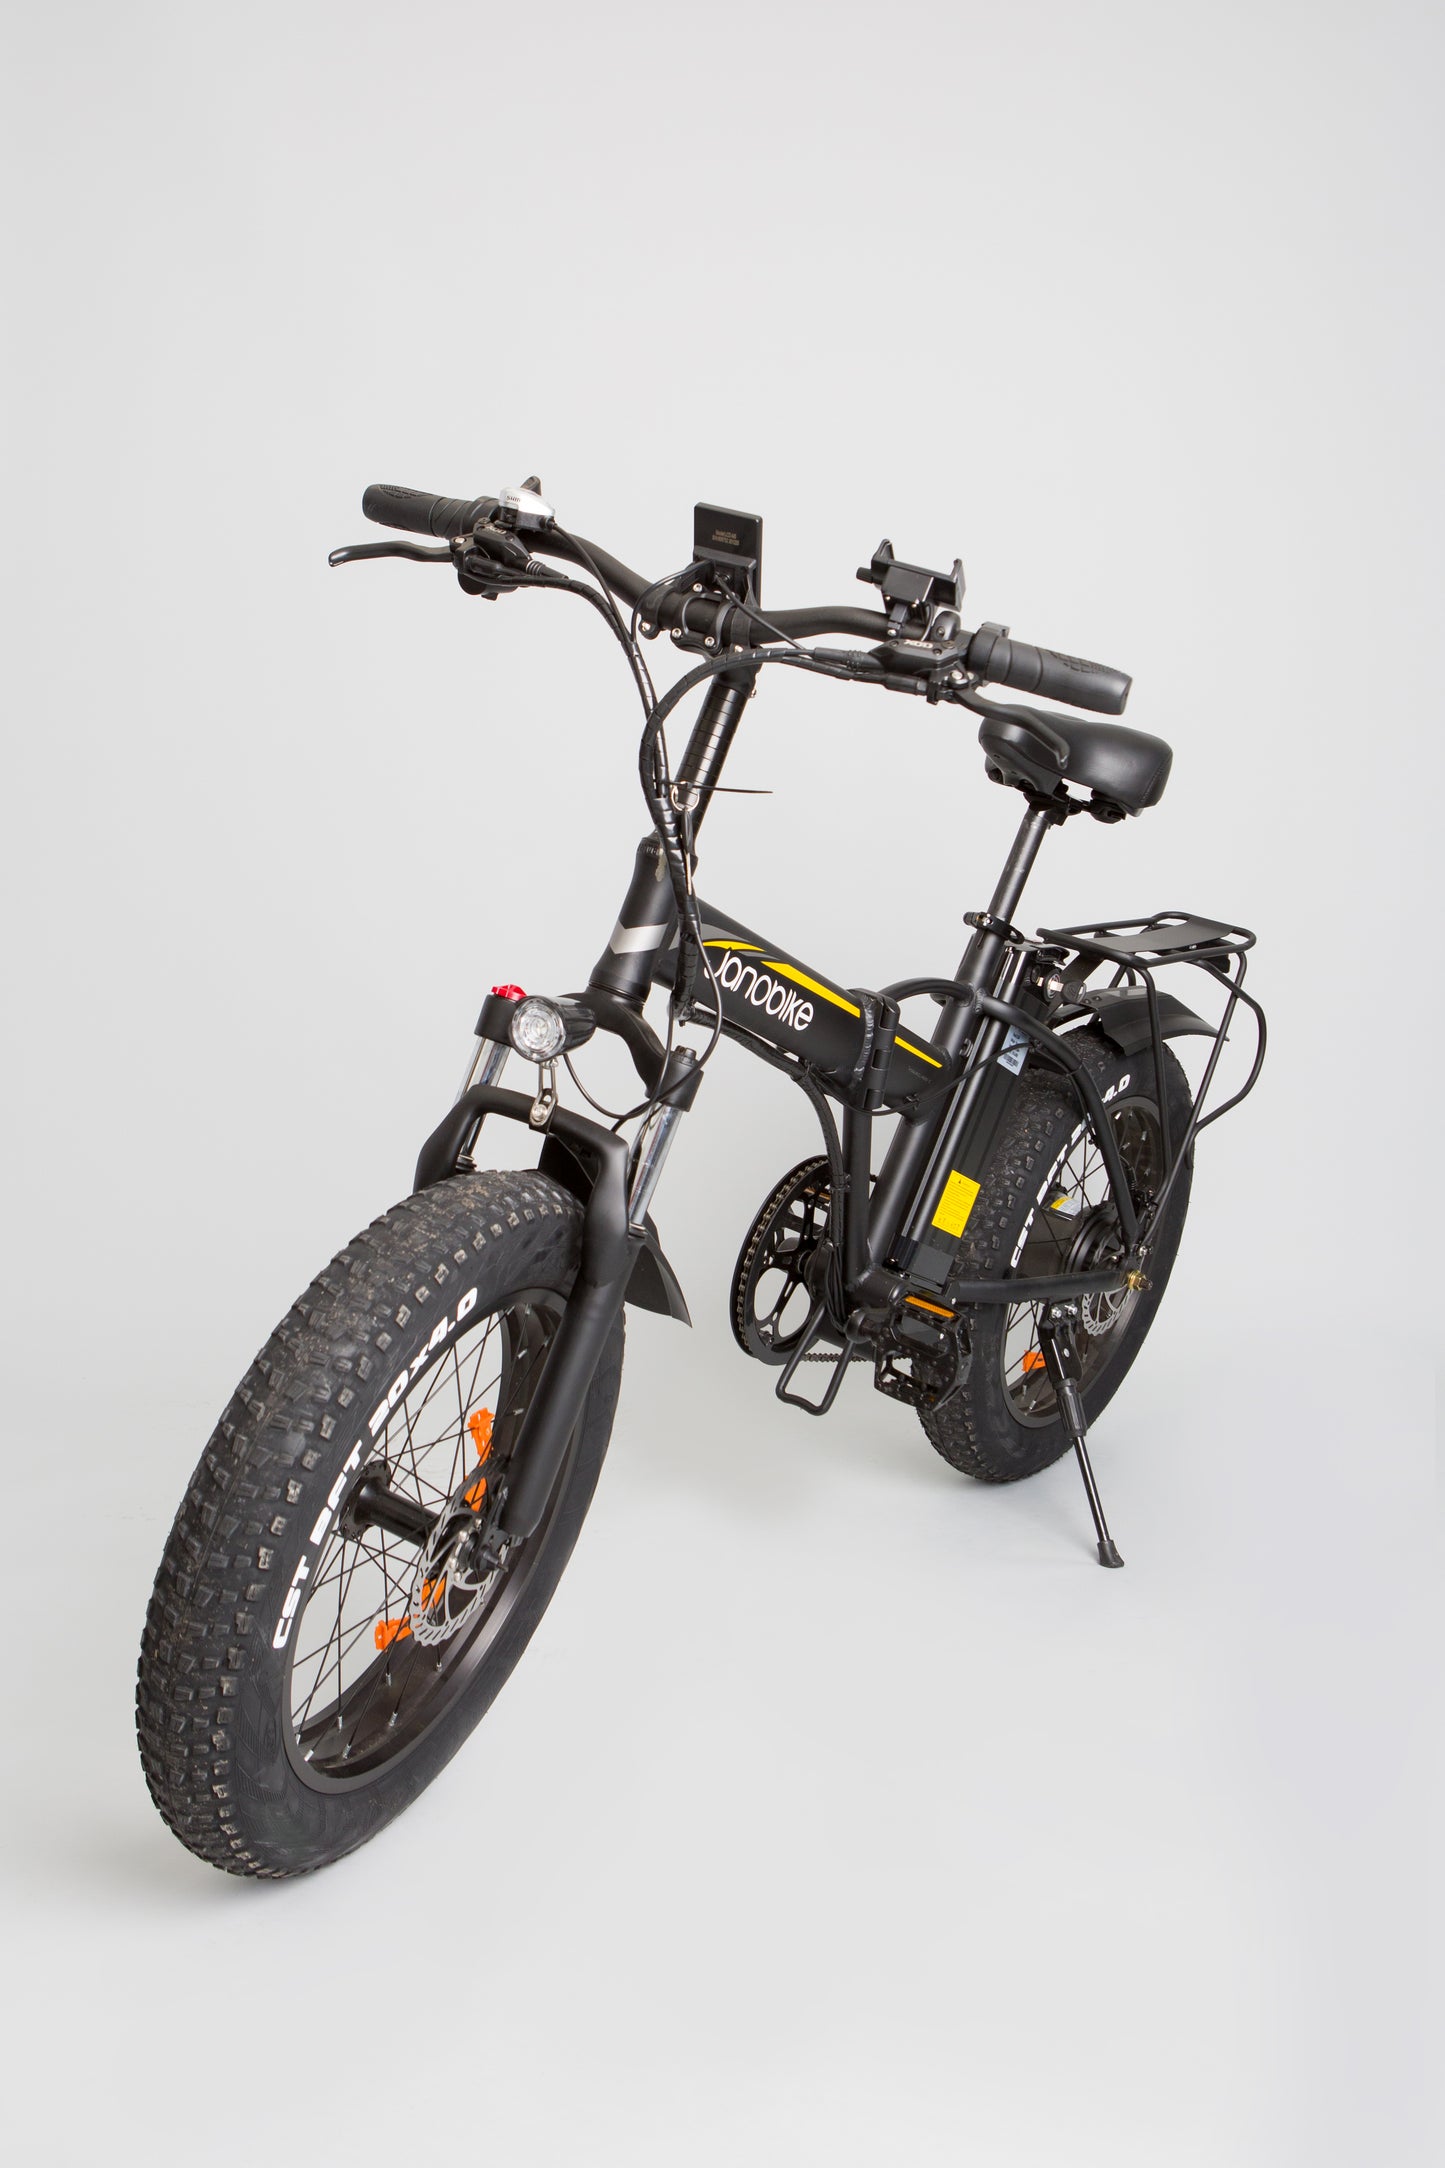 E20 EBIKE - DEMO CLEARANCE, 136 KM - IN STORE PICK-UP ONLY!